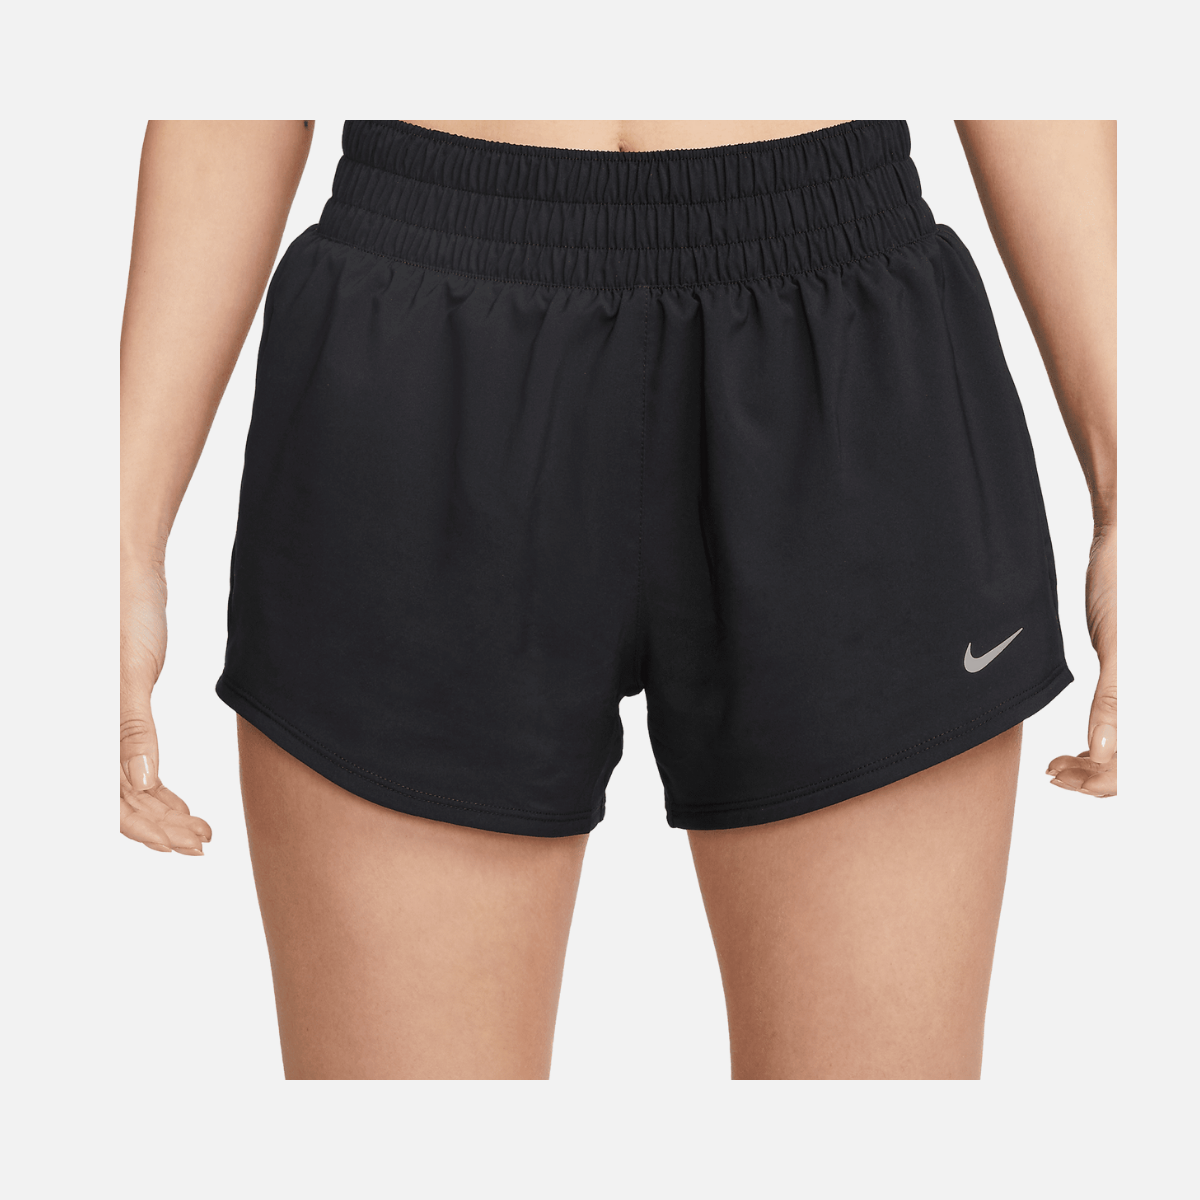 Nike Dri-Fit One Womens Mid-Rise 8cm Brief-Lined Shorts -Black